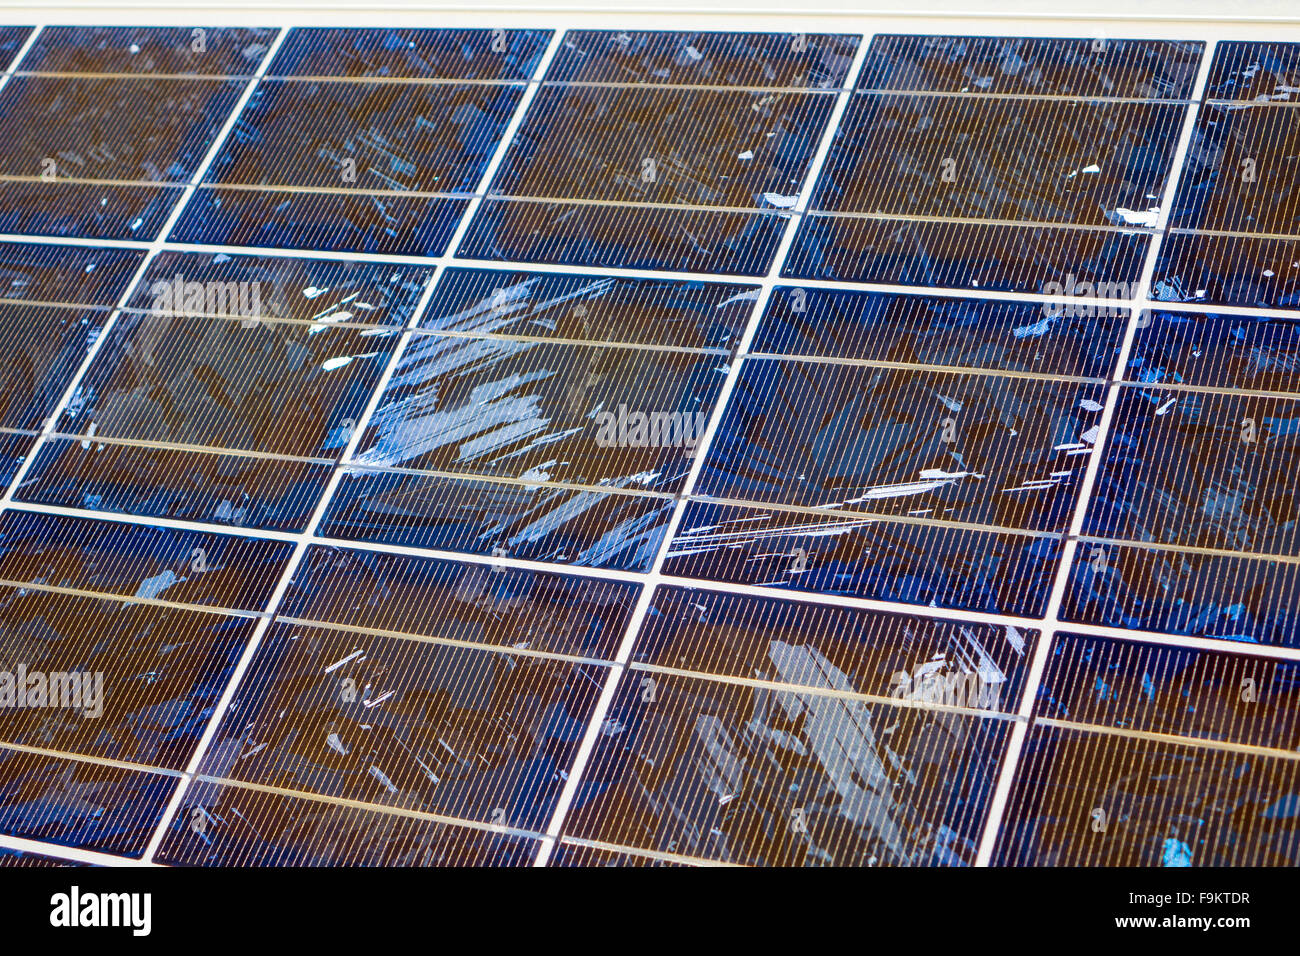 Close up of grid of silicon cells in solar panels Stock Photo